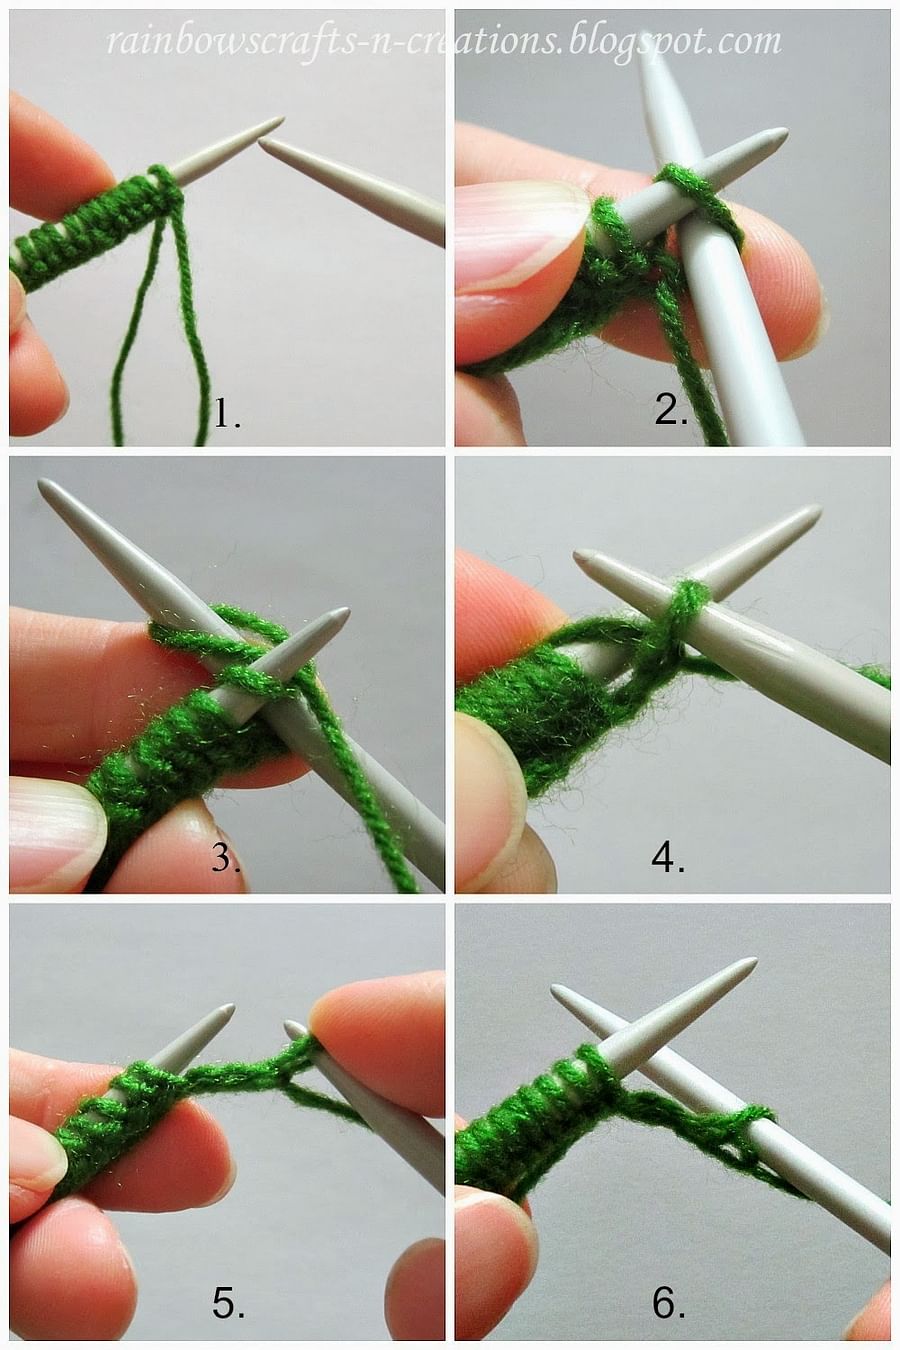 Close-up of hands performing a purl stitch in knitting